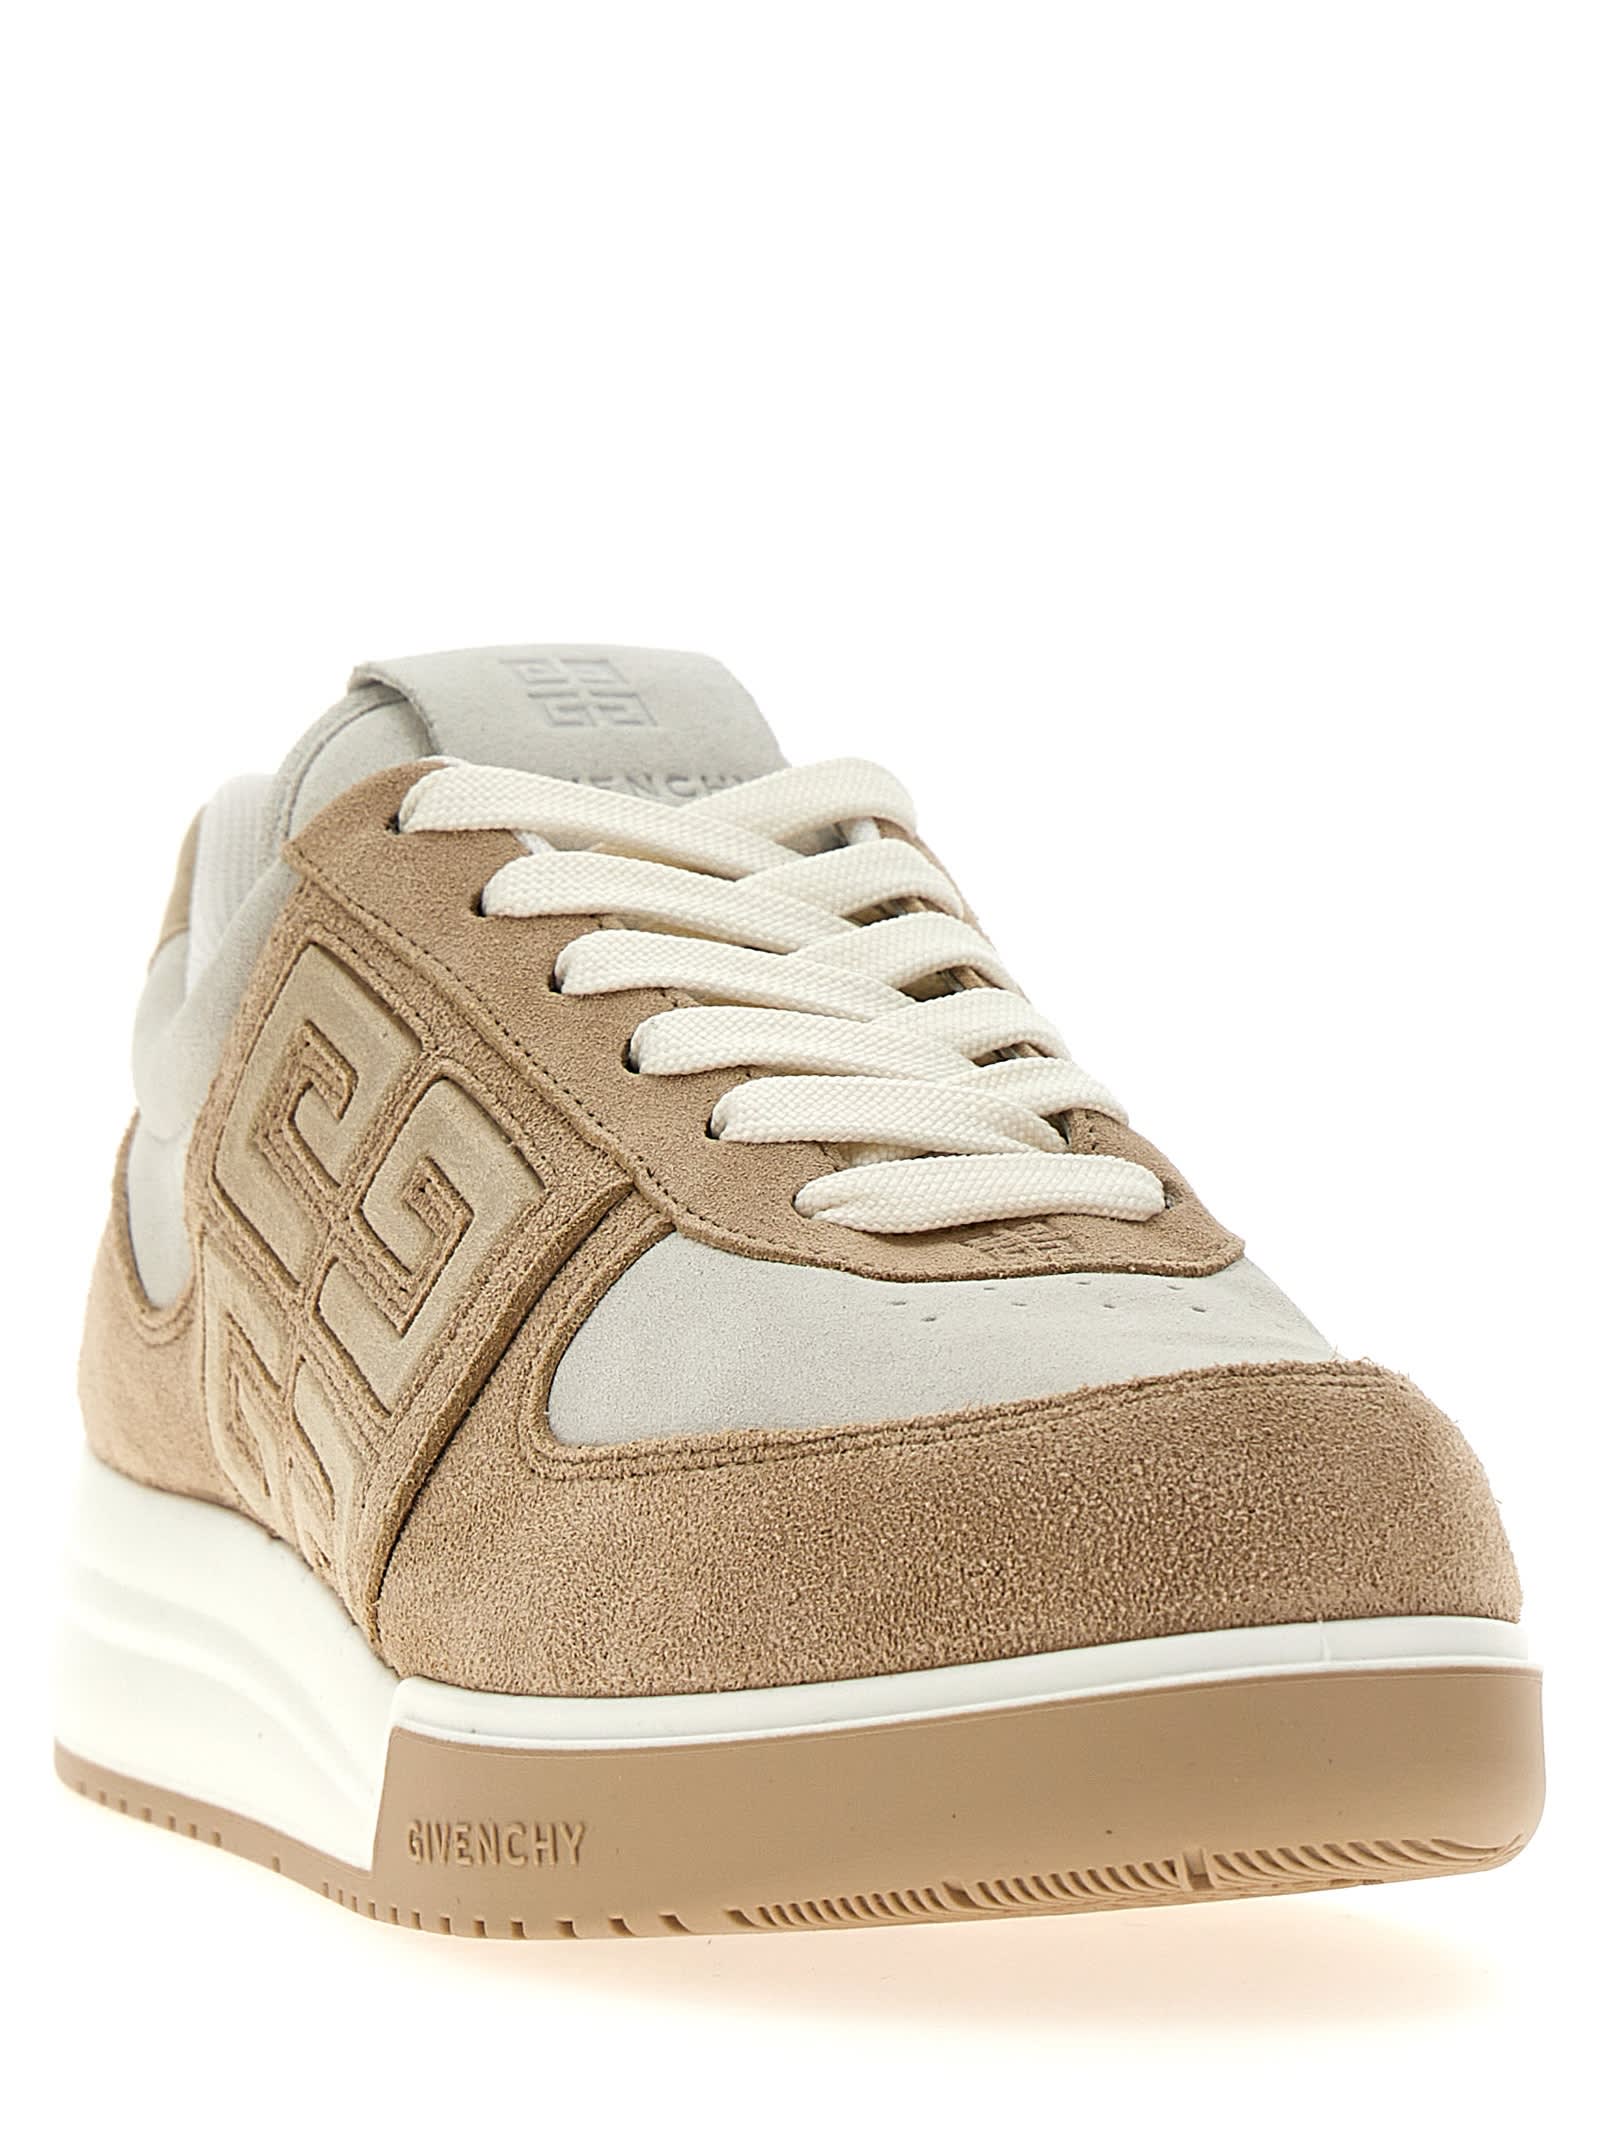 Shop Givenchy G4 Sneakers In Beige